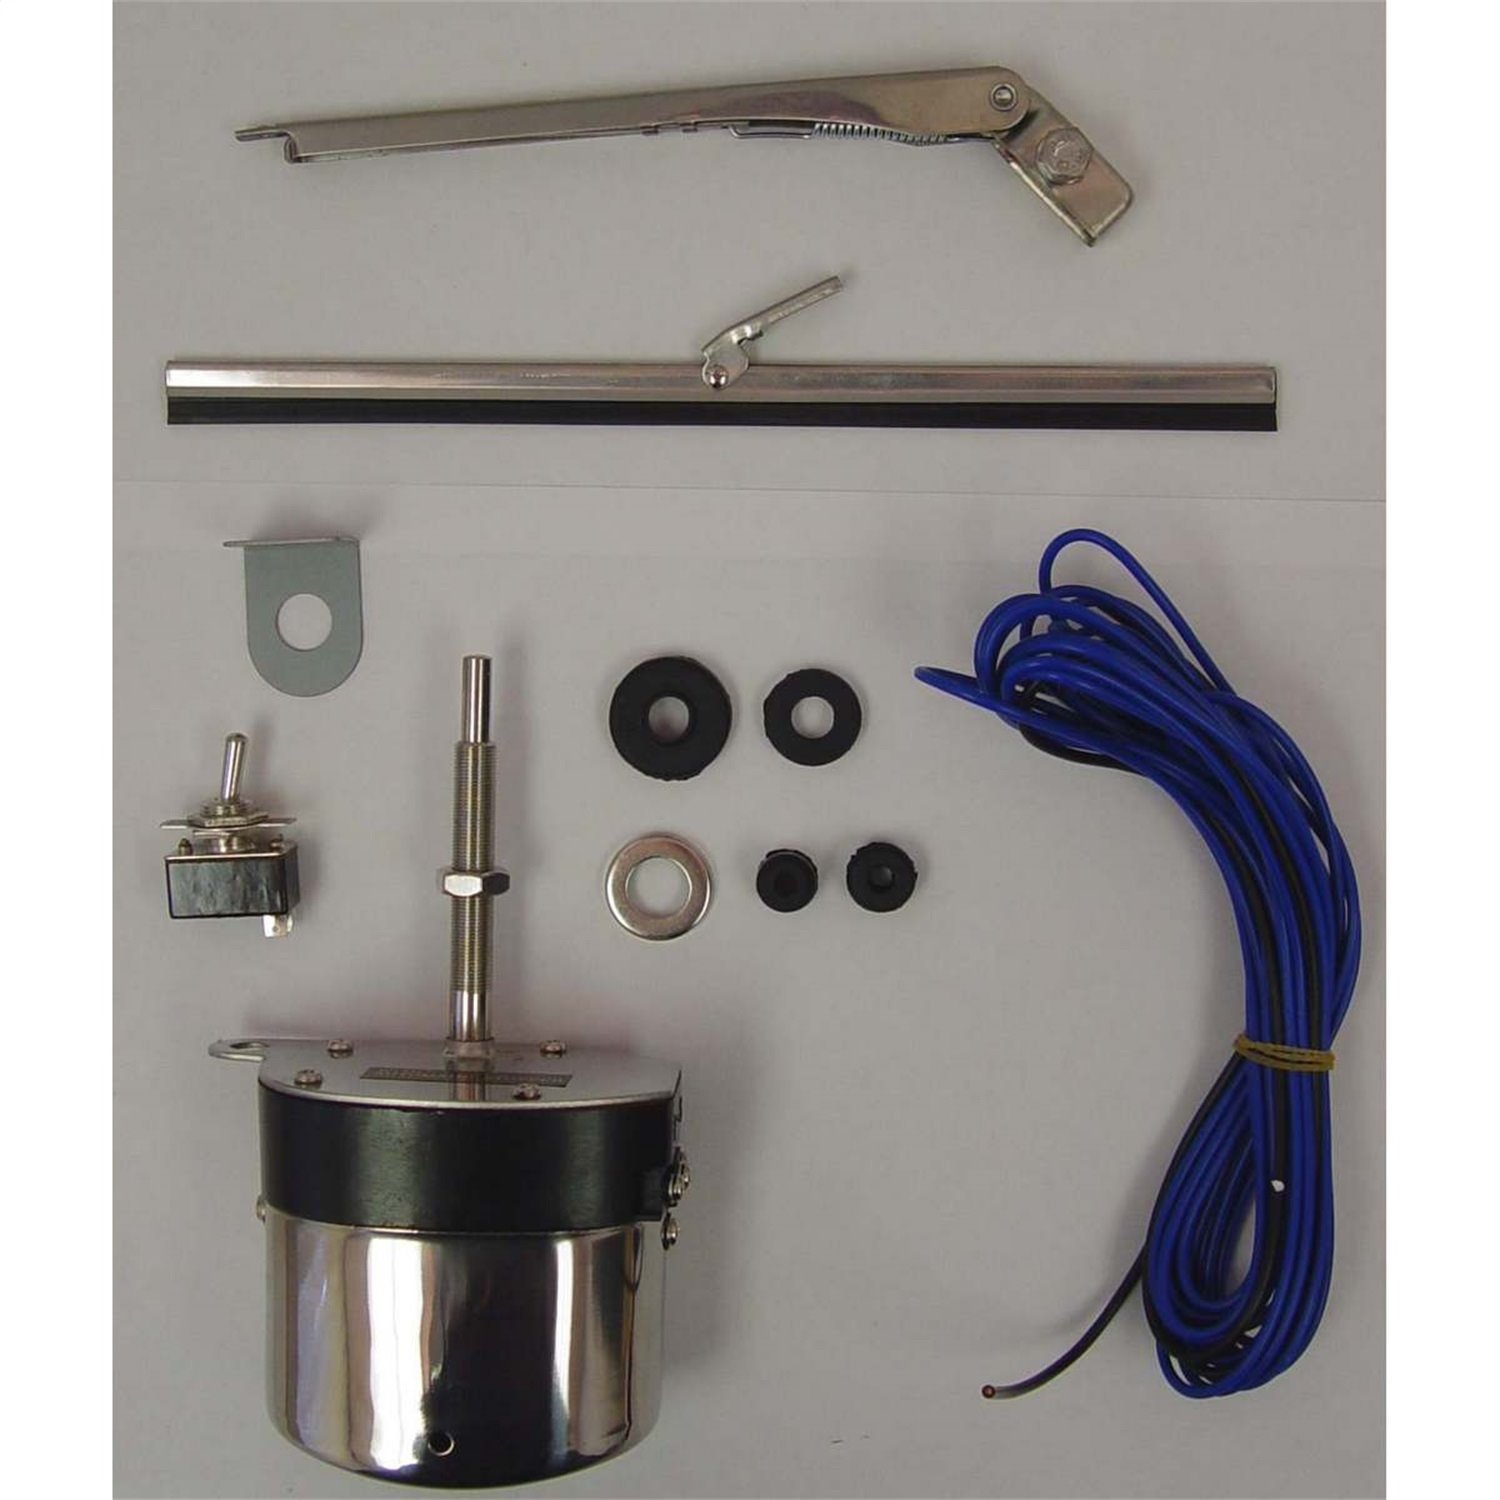 This 12-volt stainless steel windshield wiper motor kit